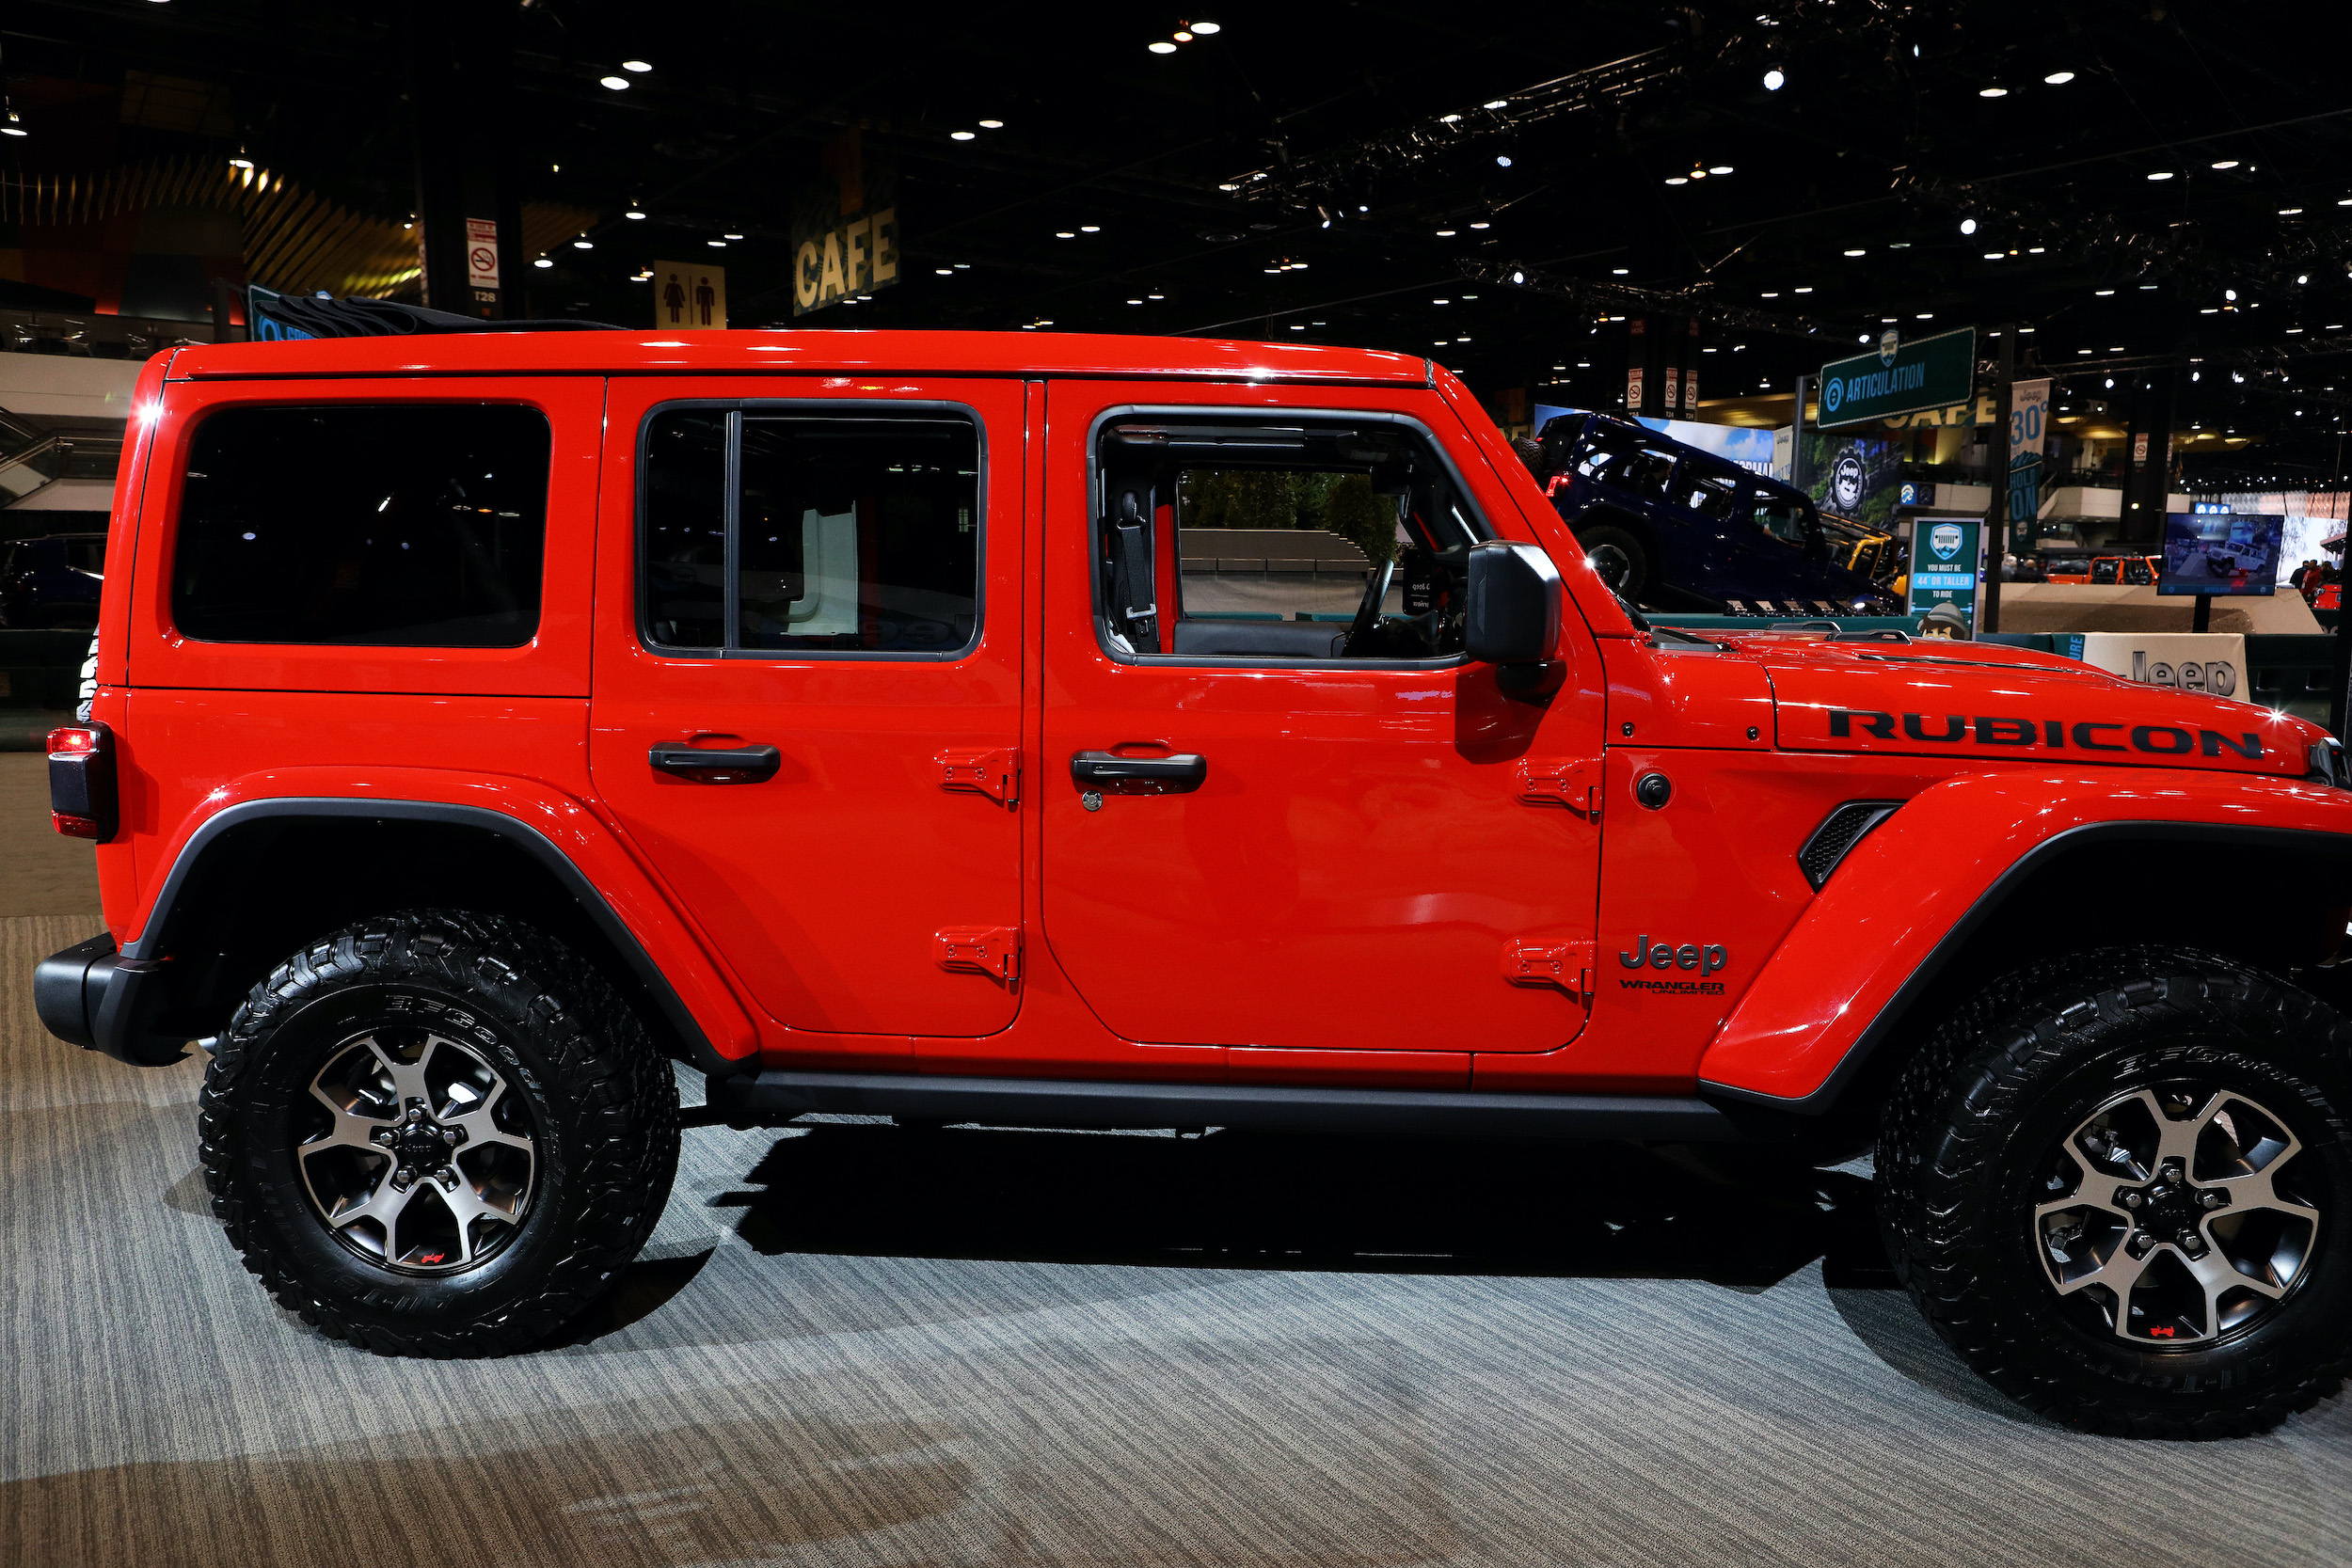 2020 Jeep Wrangler Rubicon is on display at the 112th Annual Chicago Auto Show at McCormick Place